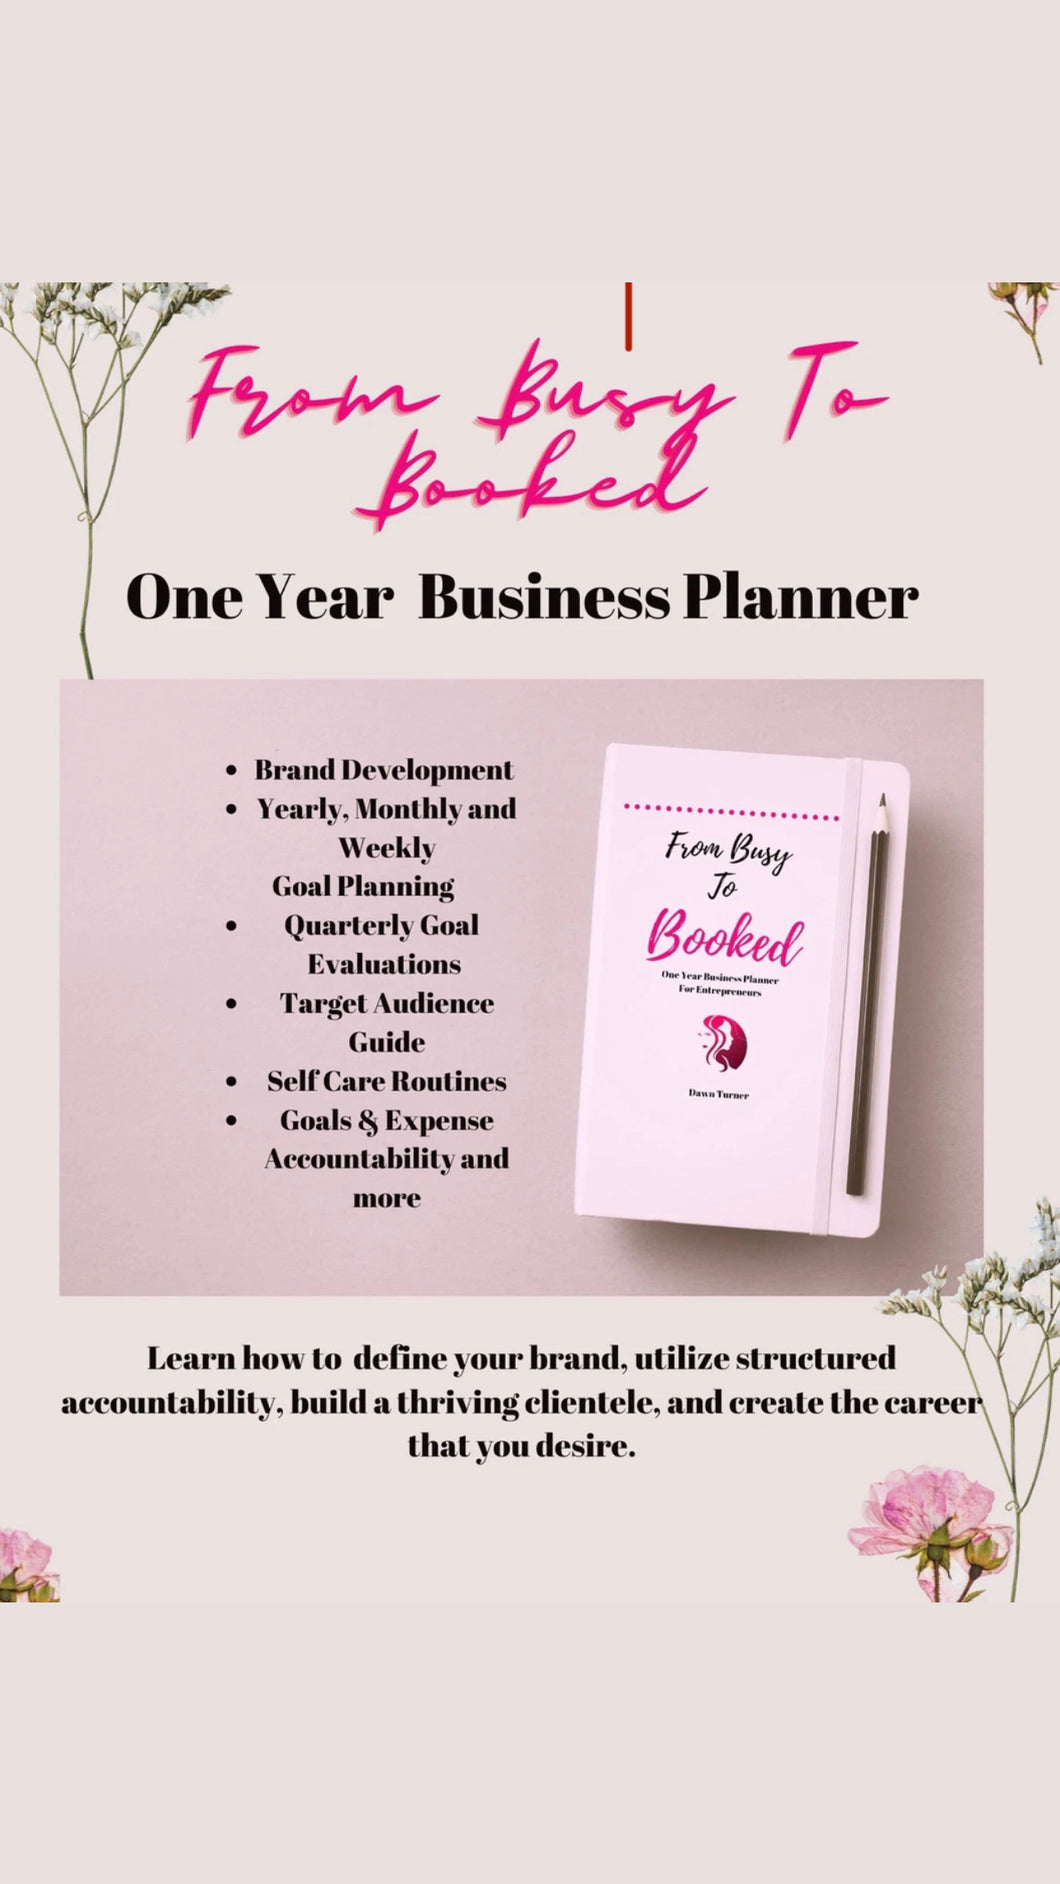 What The Follicle Academy “From Busy To Booked” Intensive Business Training